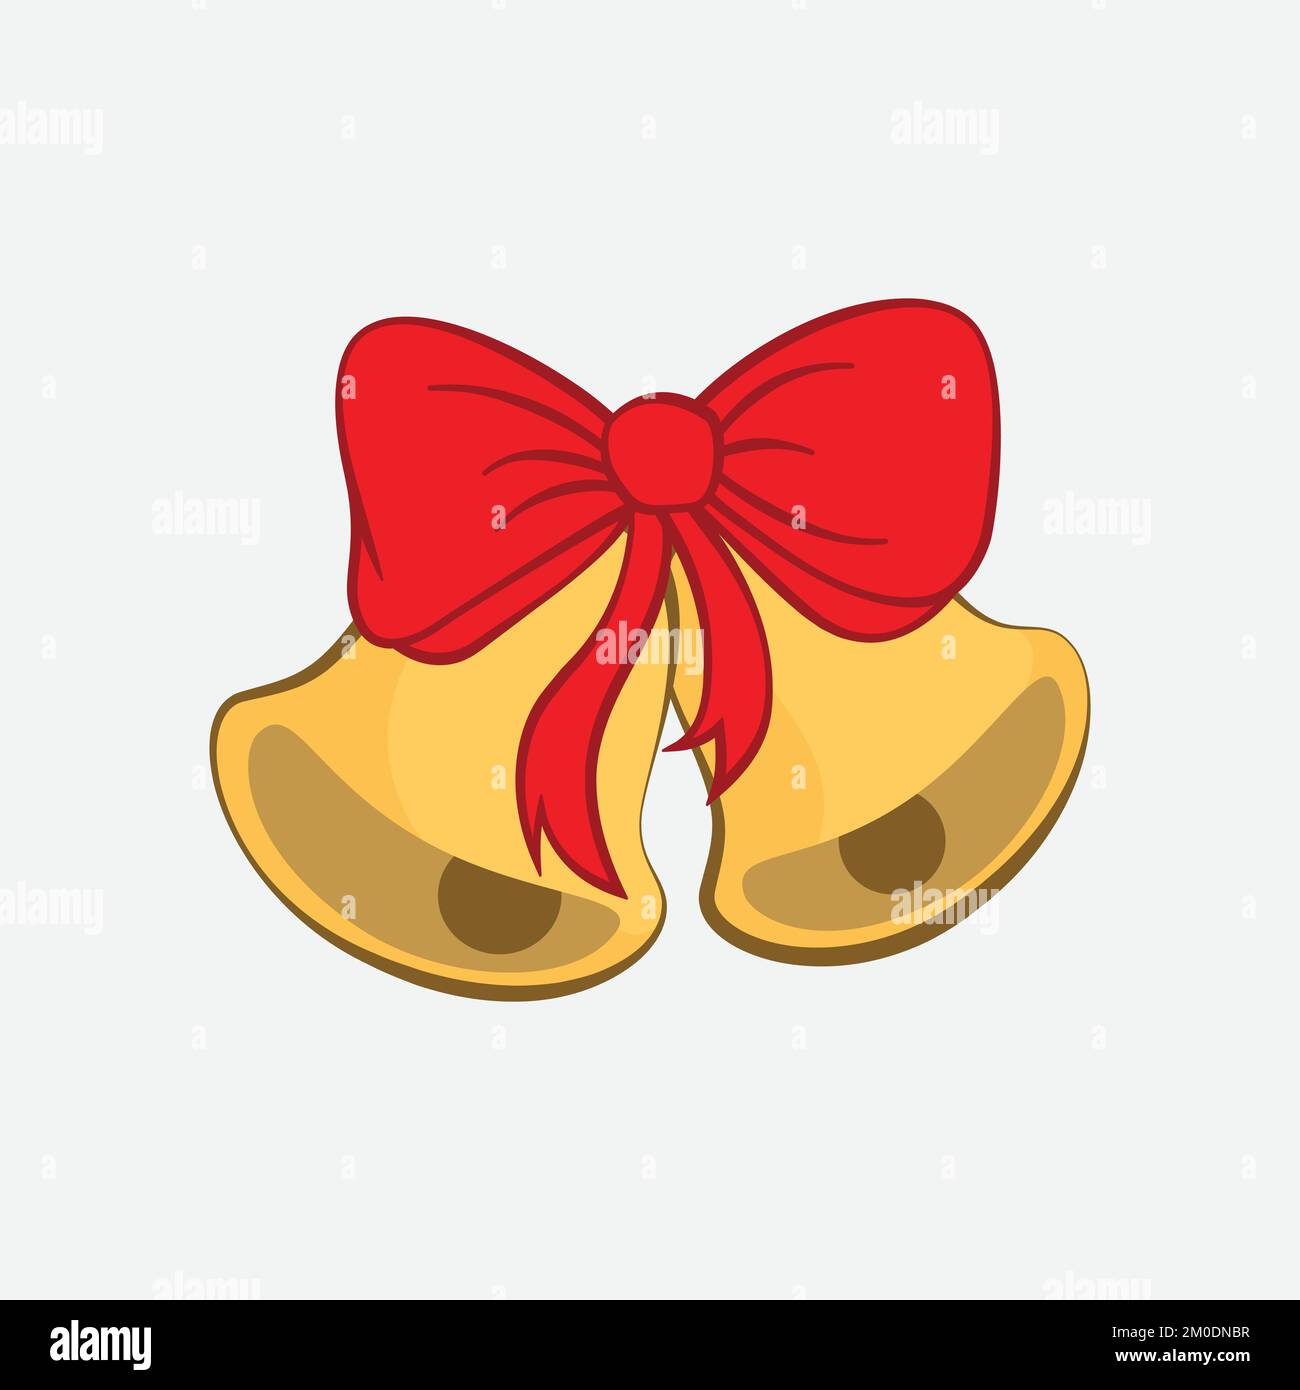 Jingle bells with red bow  Jingle bells, Christmas icons